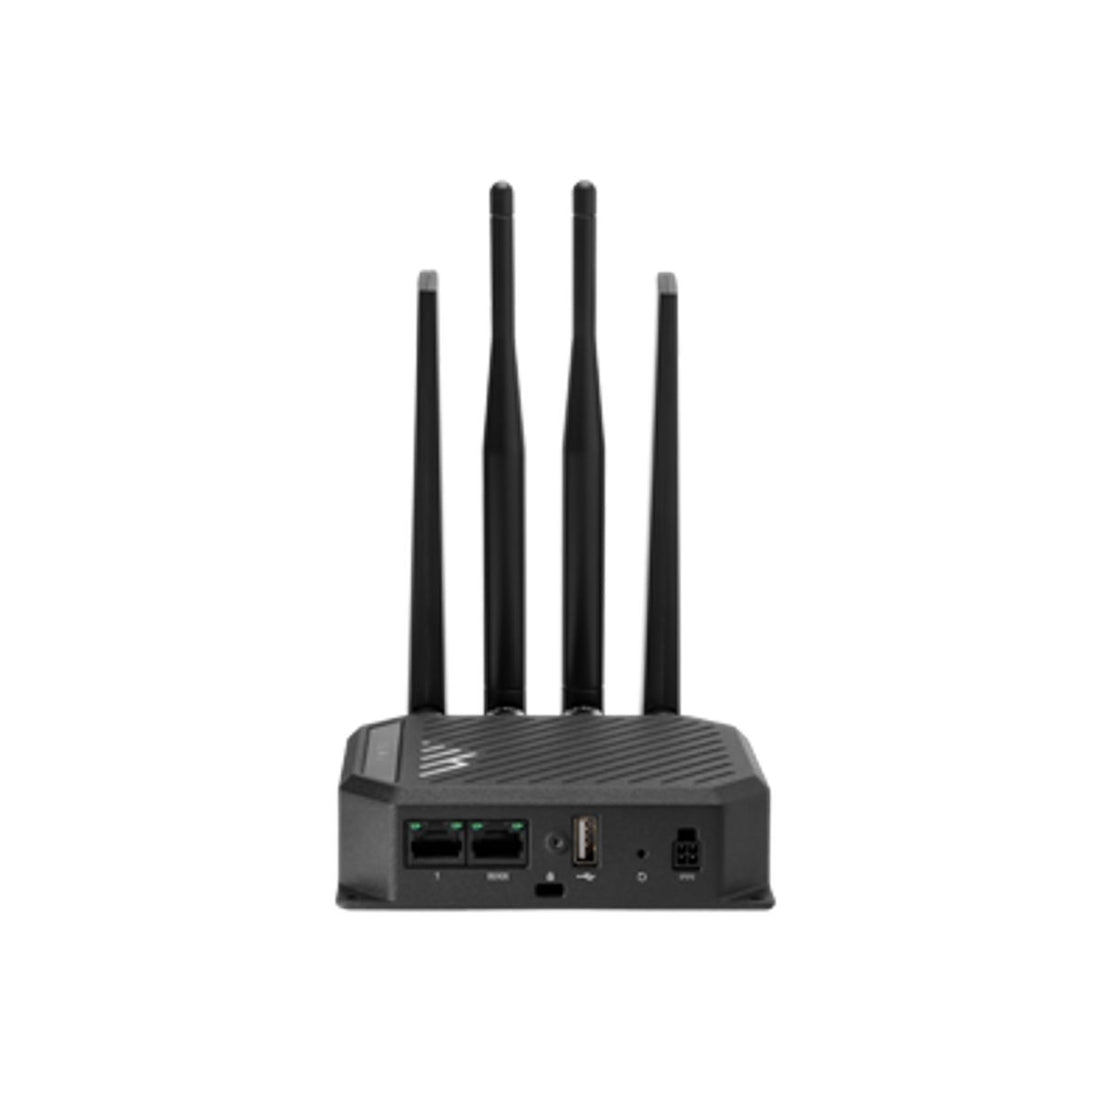 5-yr Netcloud IoT Essentials Plan, Advanced Plan and S700 router with WiFi (150 Mbps modem), with AC power supply and antennas, Global